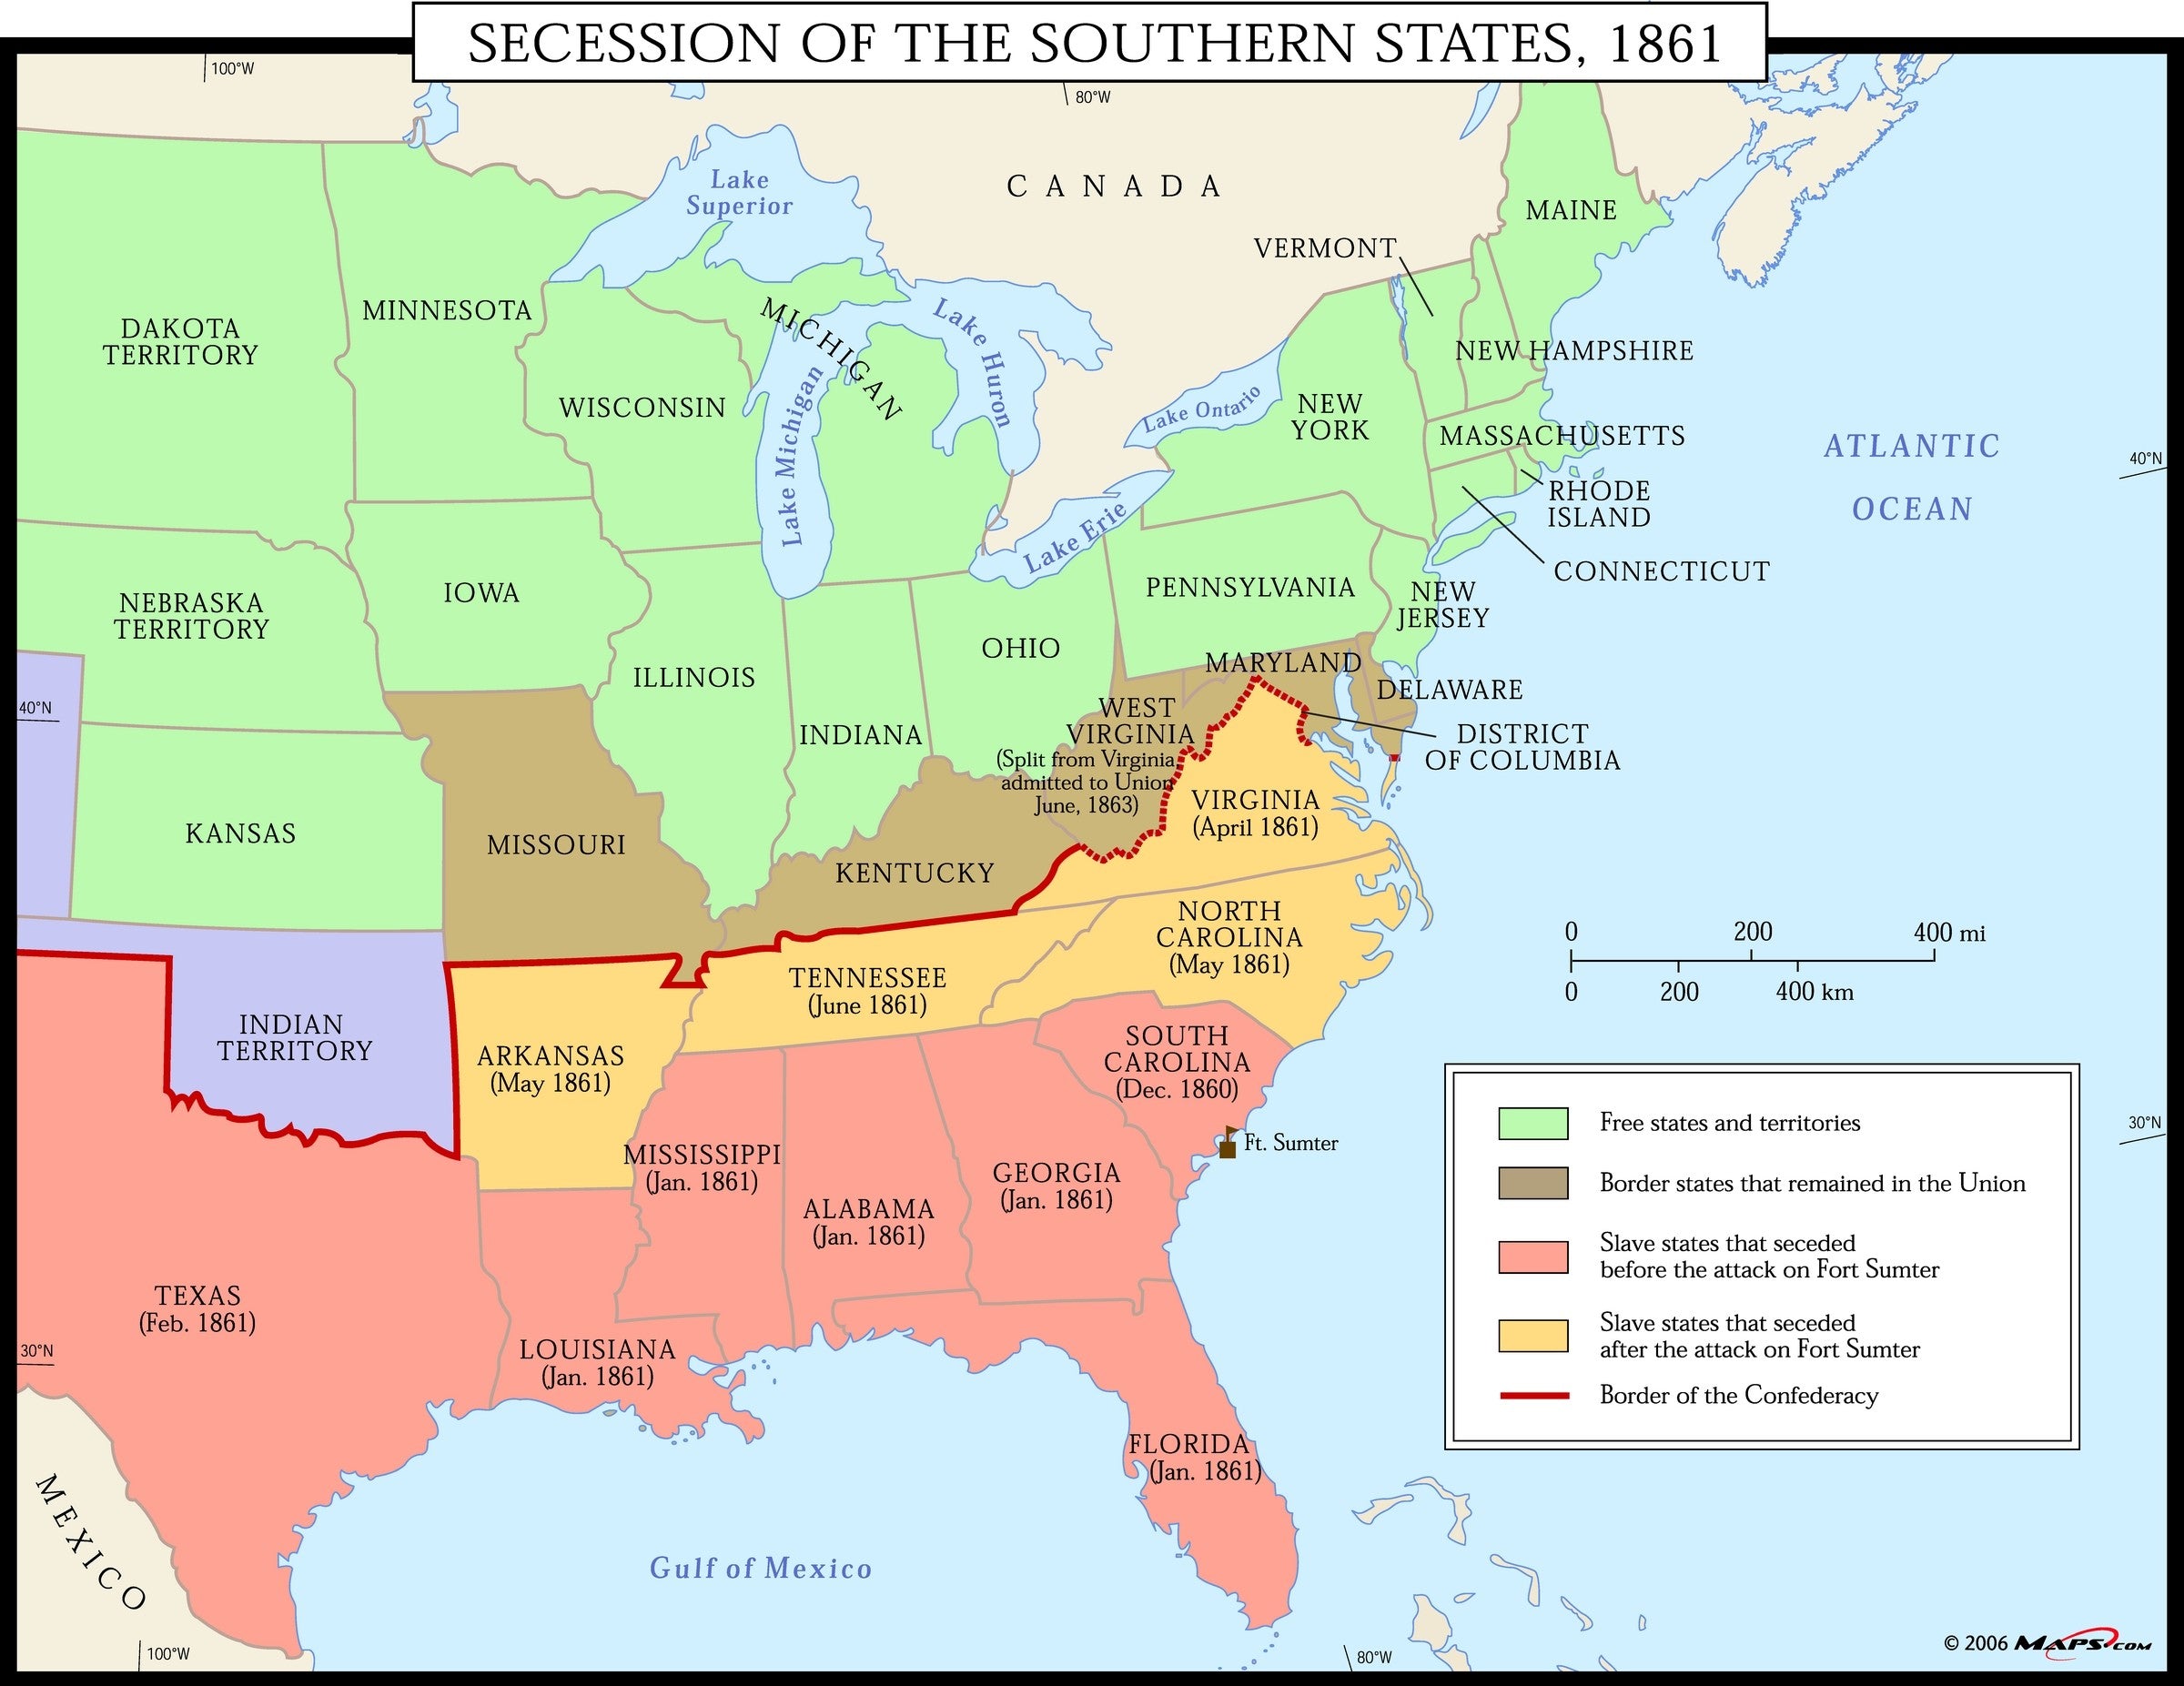 Maps.com Secession Of The Southern States 1861 Wall Map 2400x ?v=1572562970